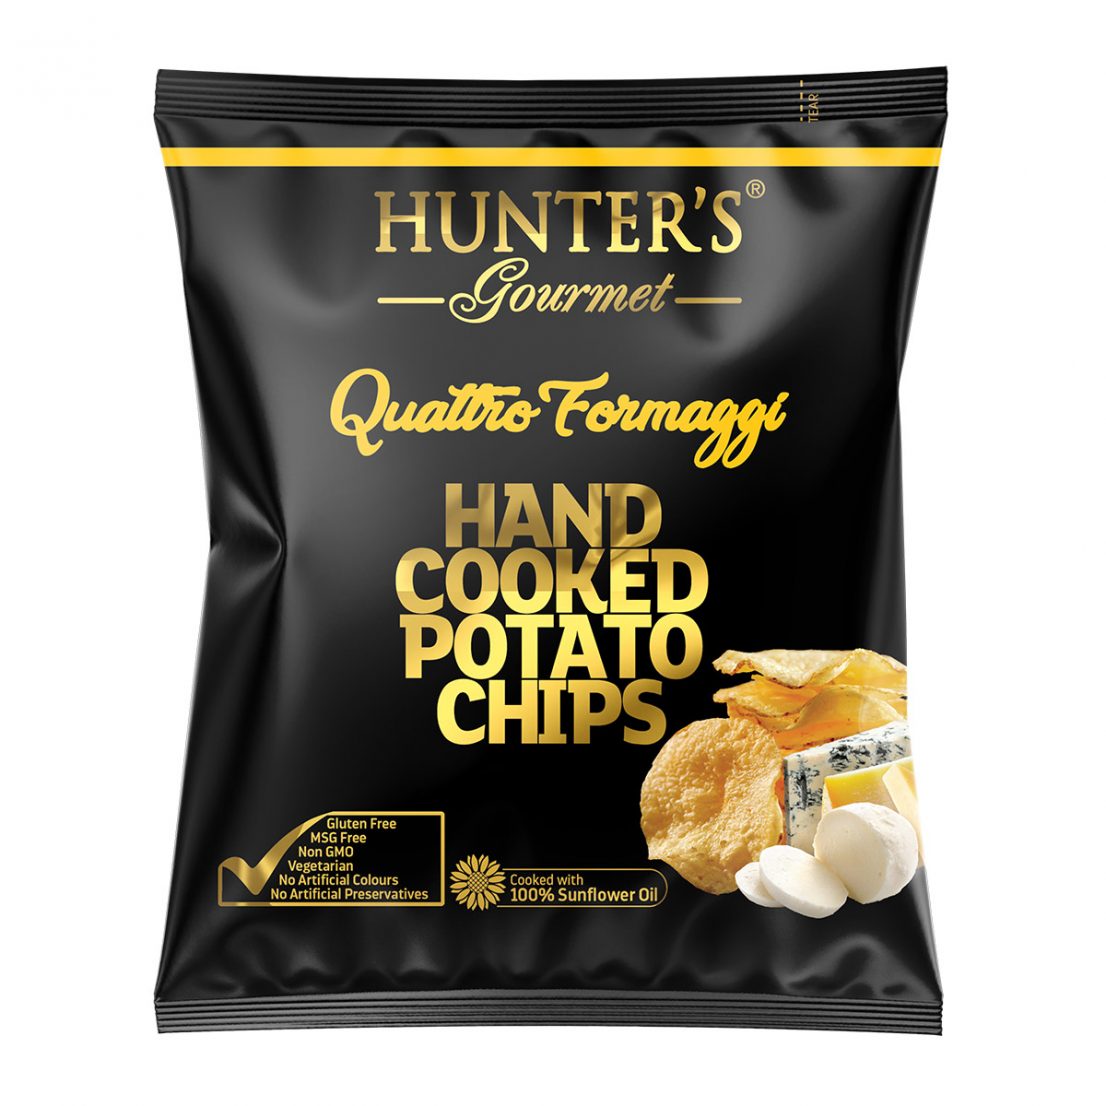 Hunters Gourmet Hand Cooked Potato Chips Quattro Formaggi Gold 